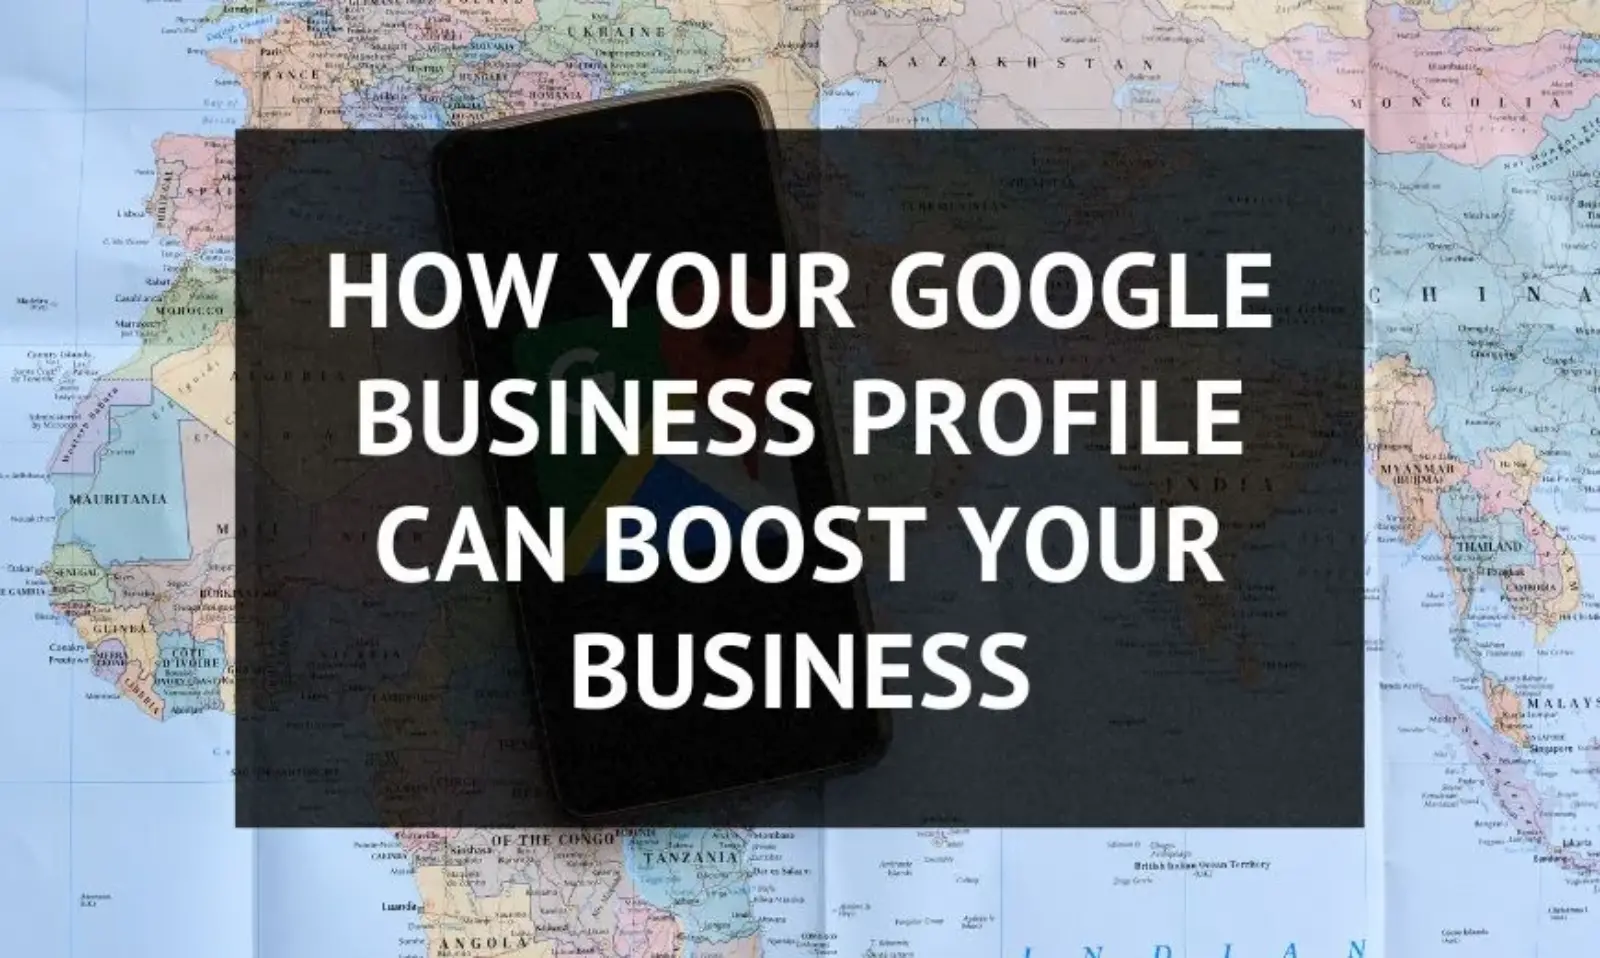 How Your Google Business Profile Can Boost Your Business